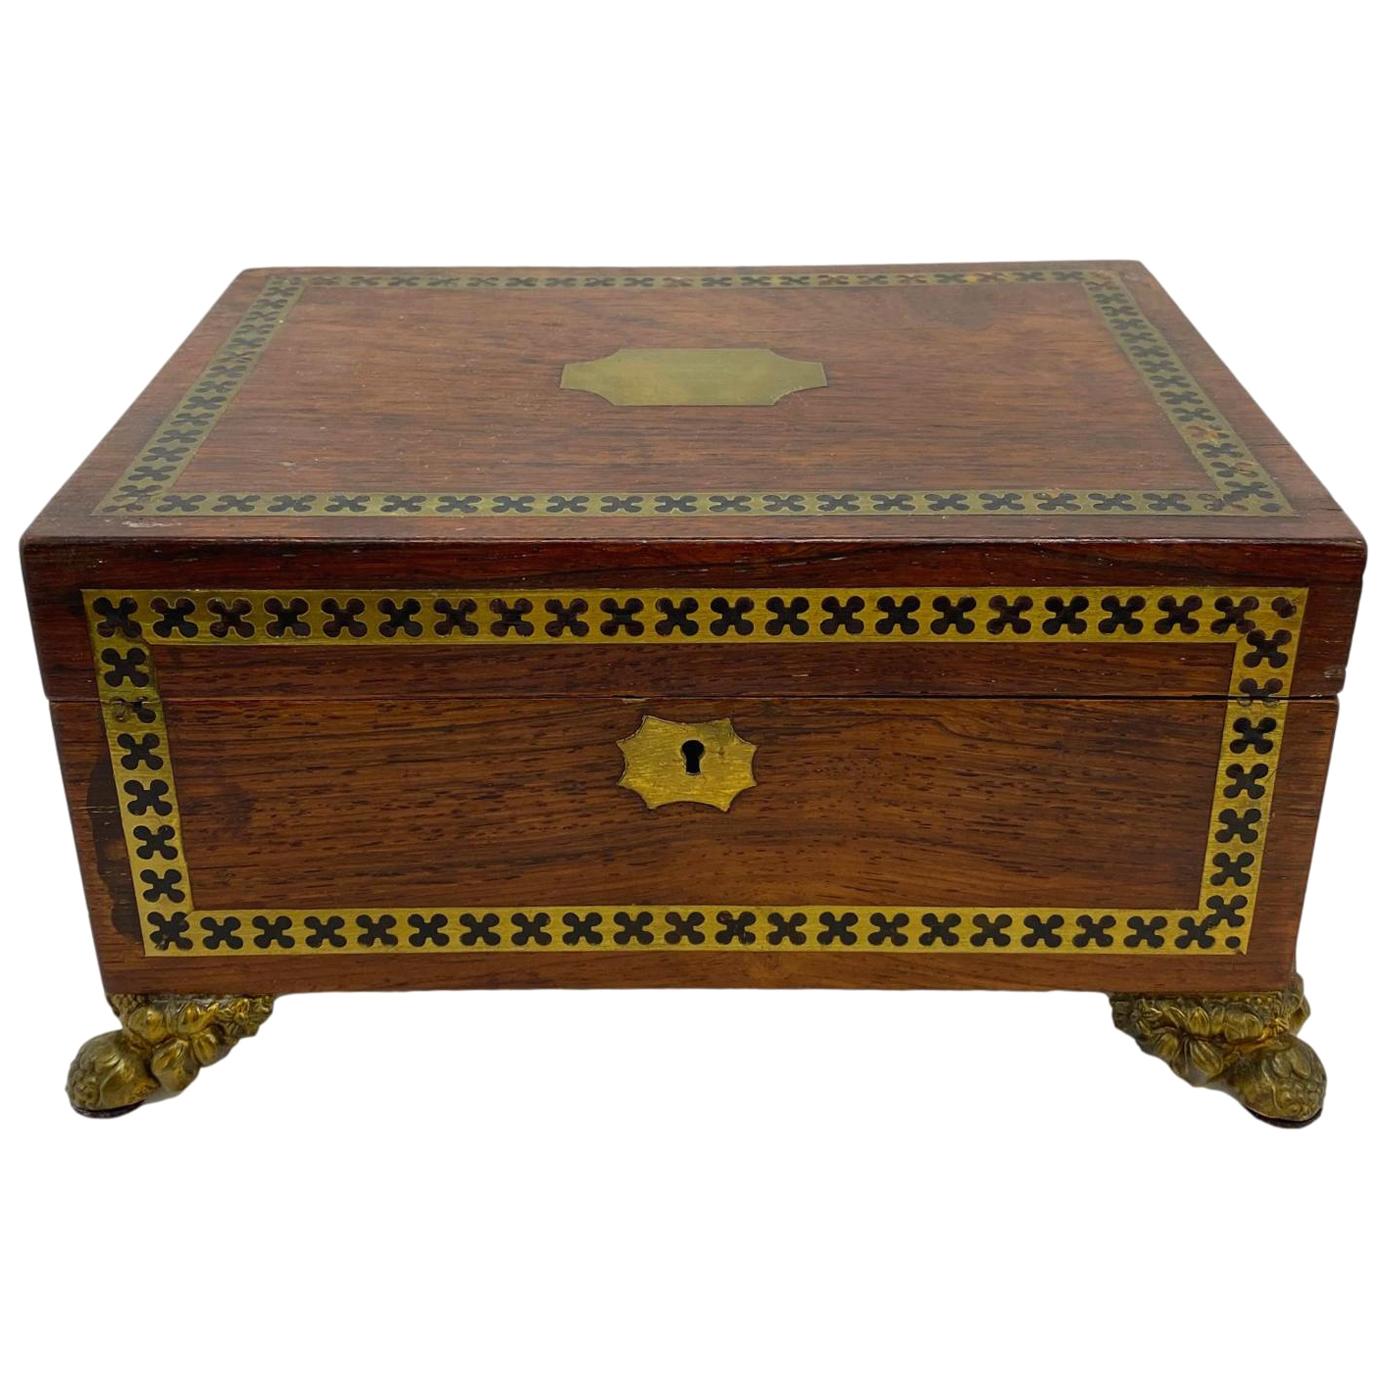 Antique Regency Box in Rosewood with Inlaid Ebony and Brass, English, circa 1820